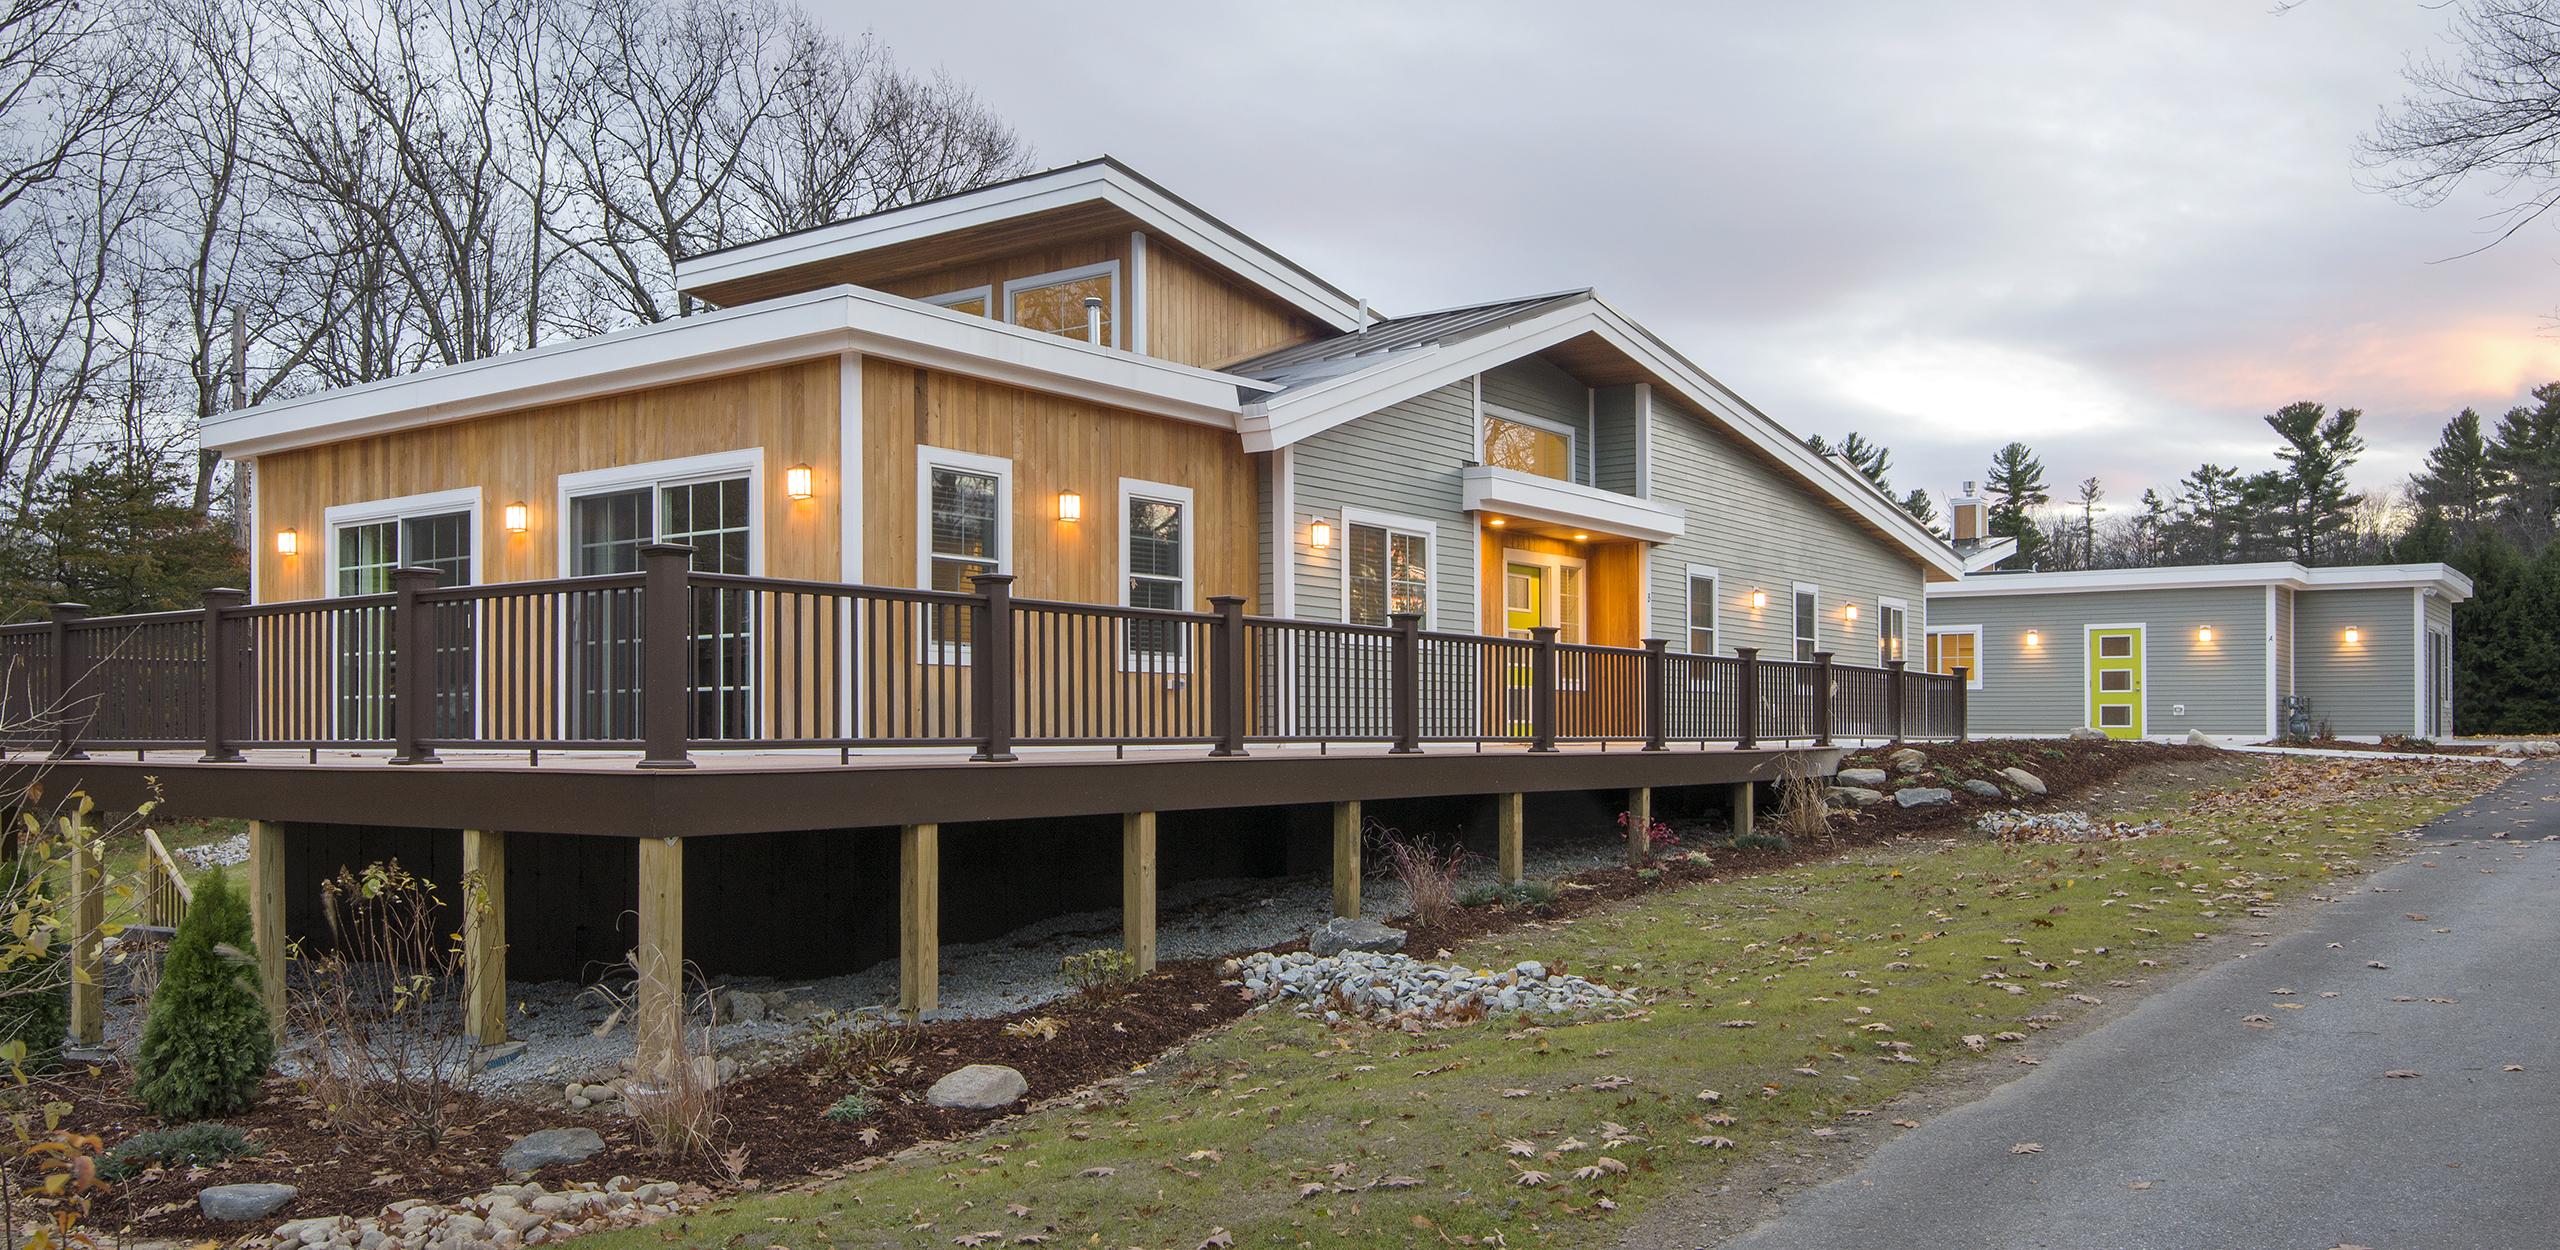 New construction of a sustainable 2-building, 9-unit group home in Carlisle, MA.